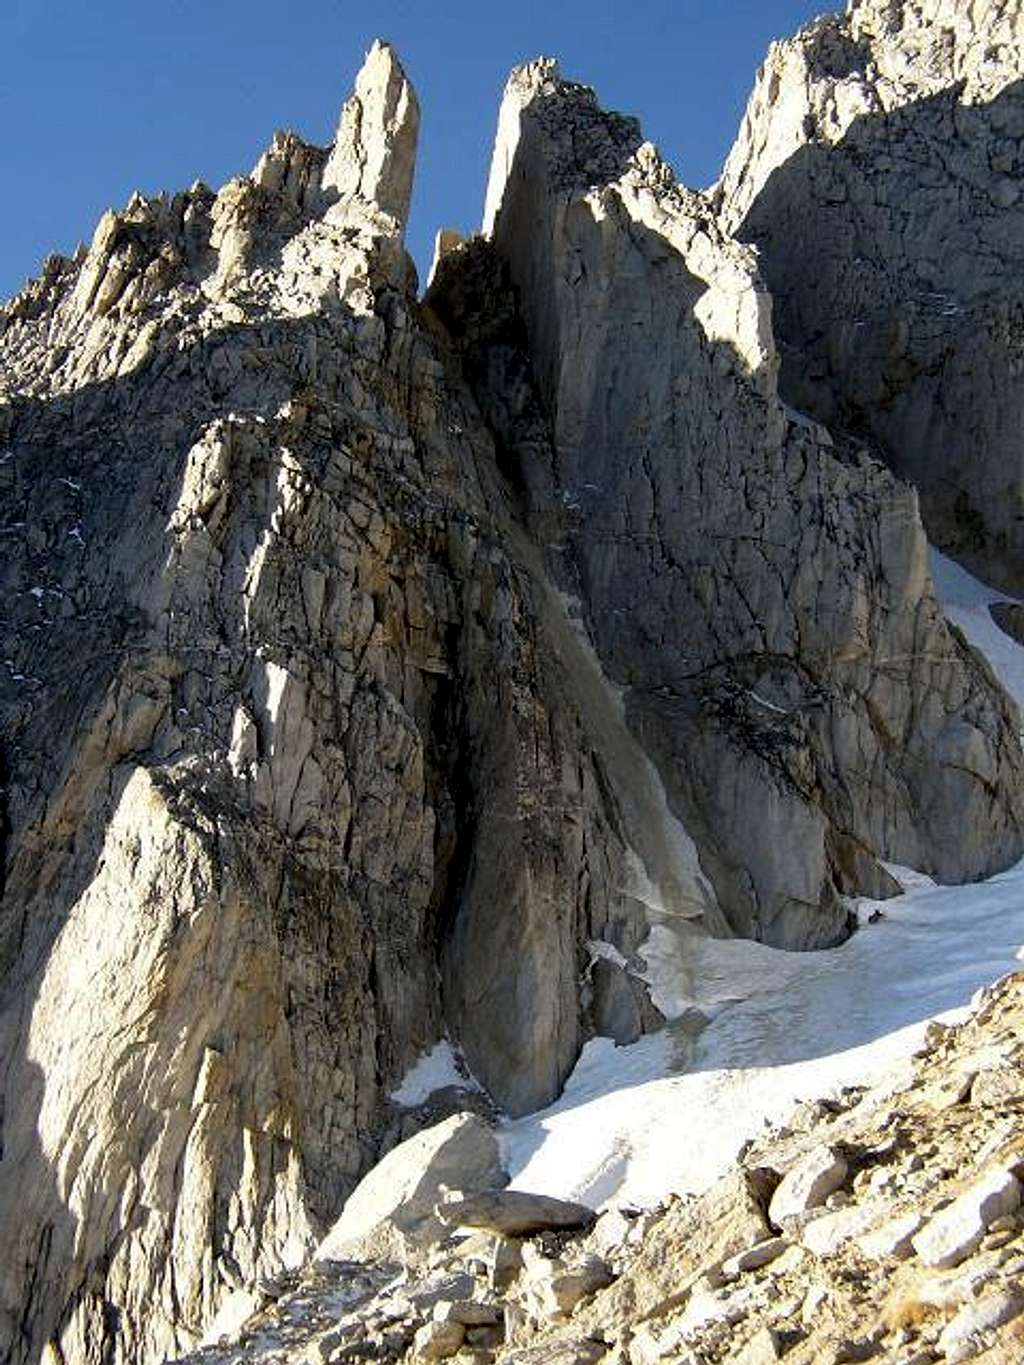 23-Oct-2005: Middle couloir....